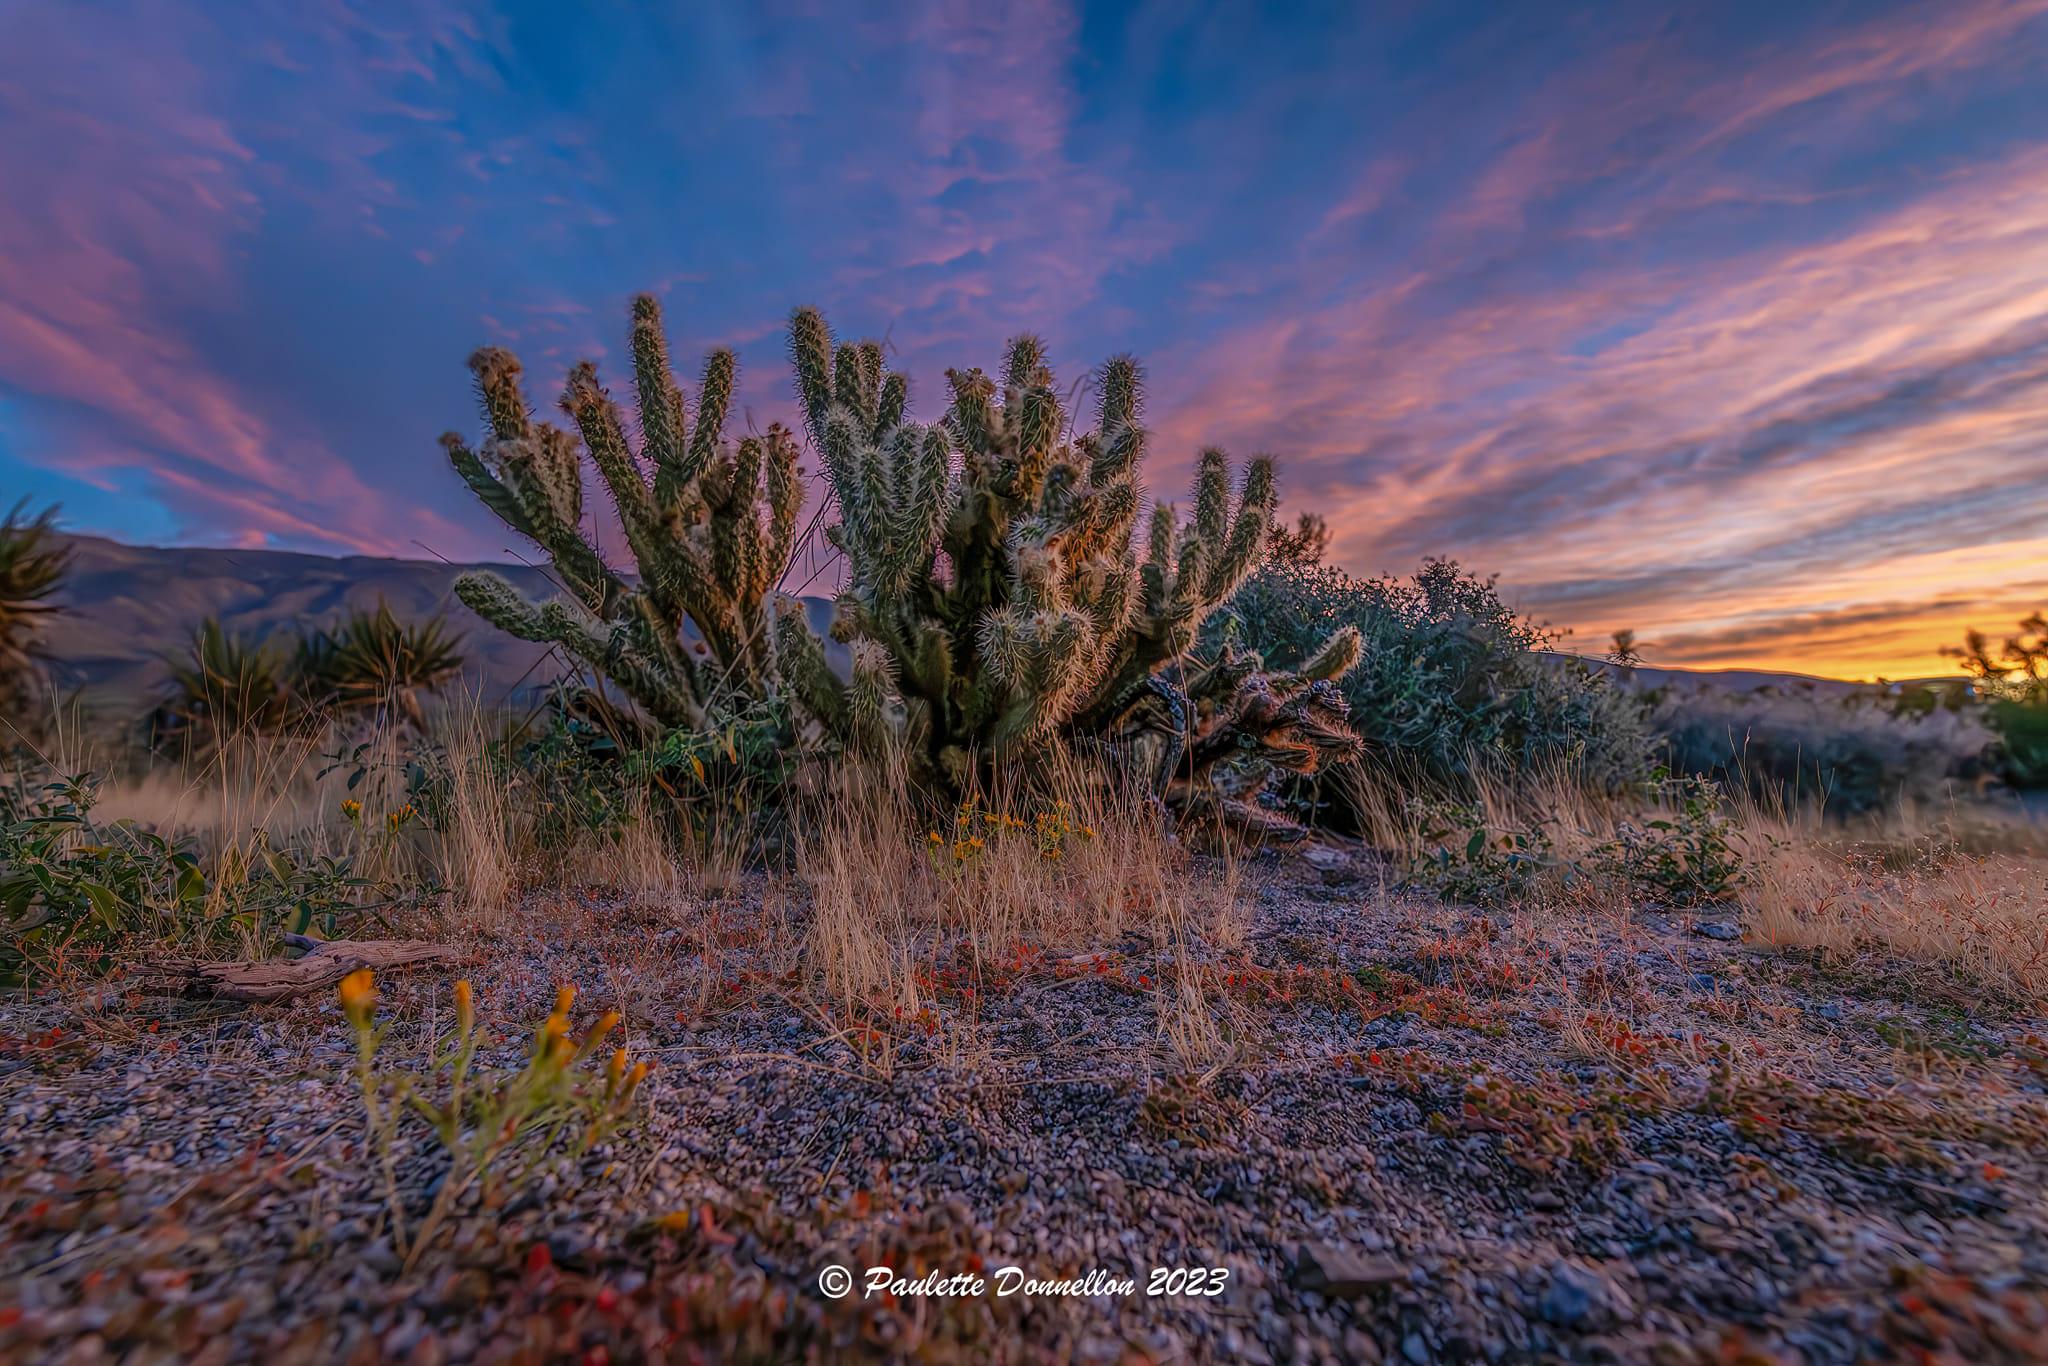 Photo of sunrise at Plum Canyon. Cactus in forefront with purple and blue sky behind it.